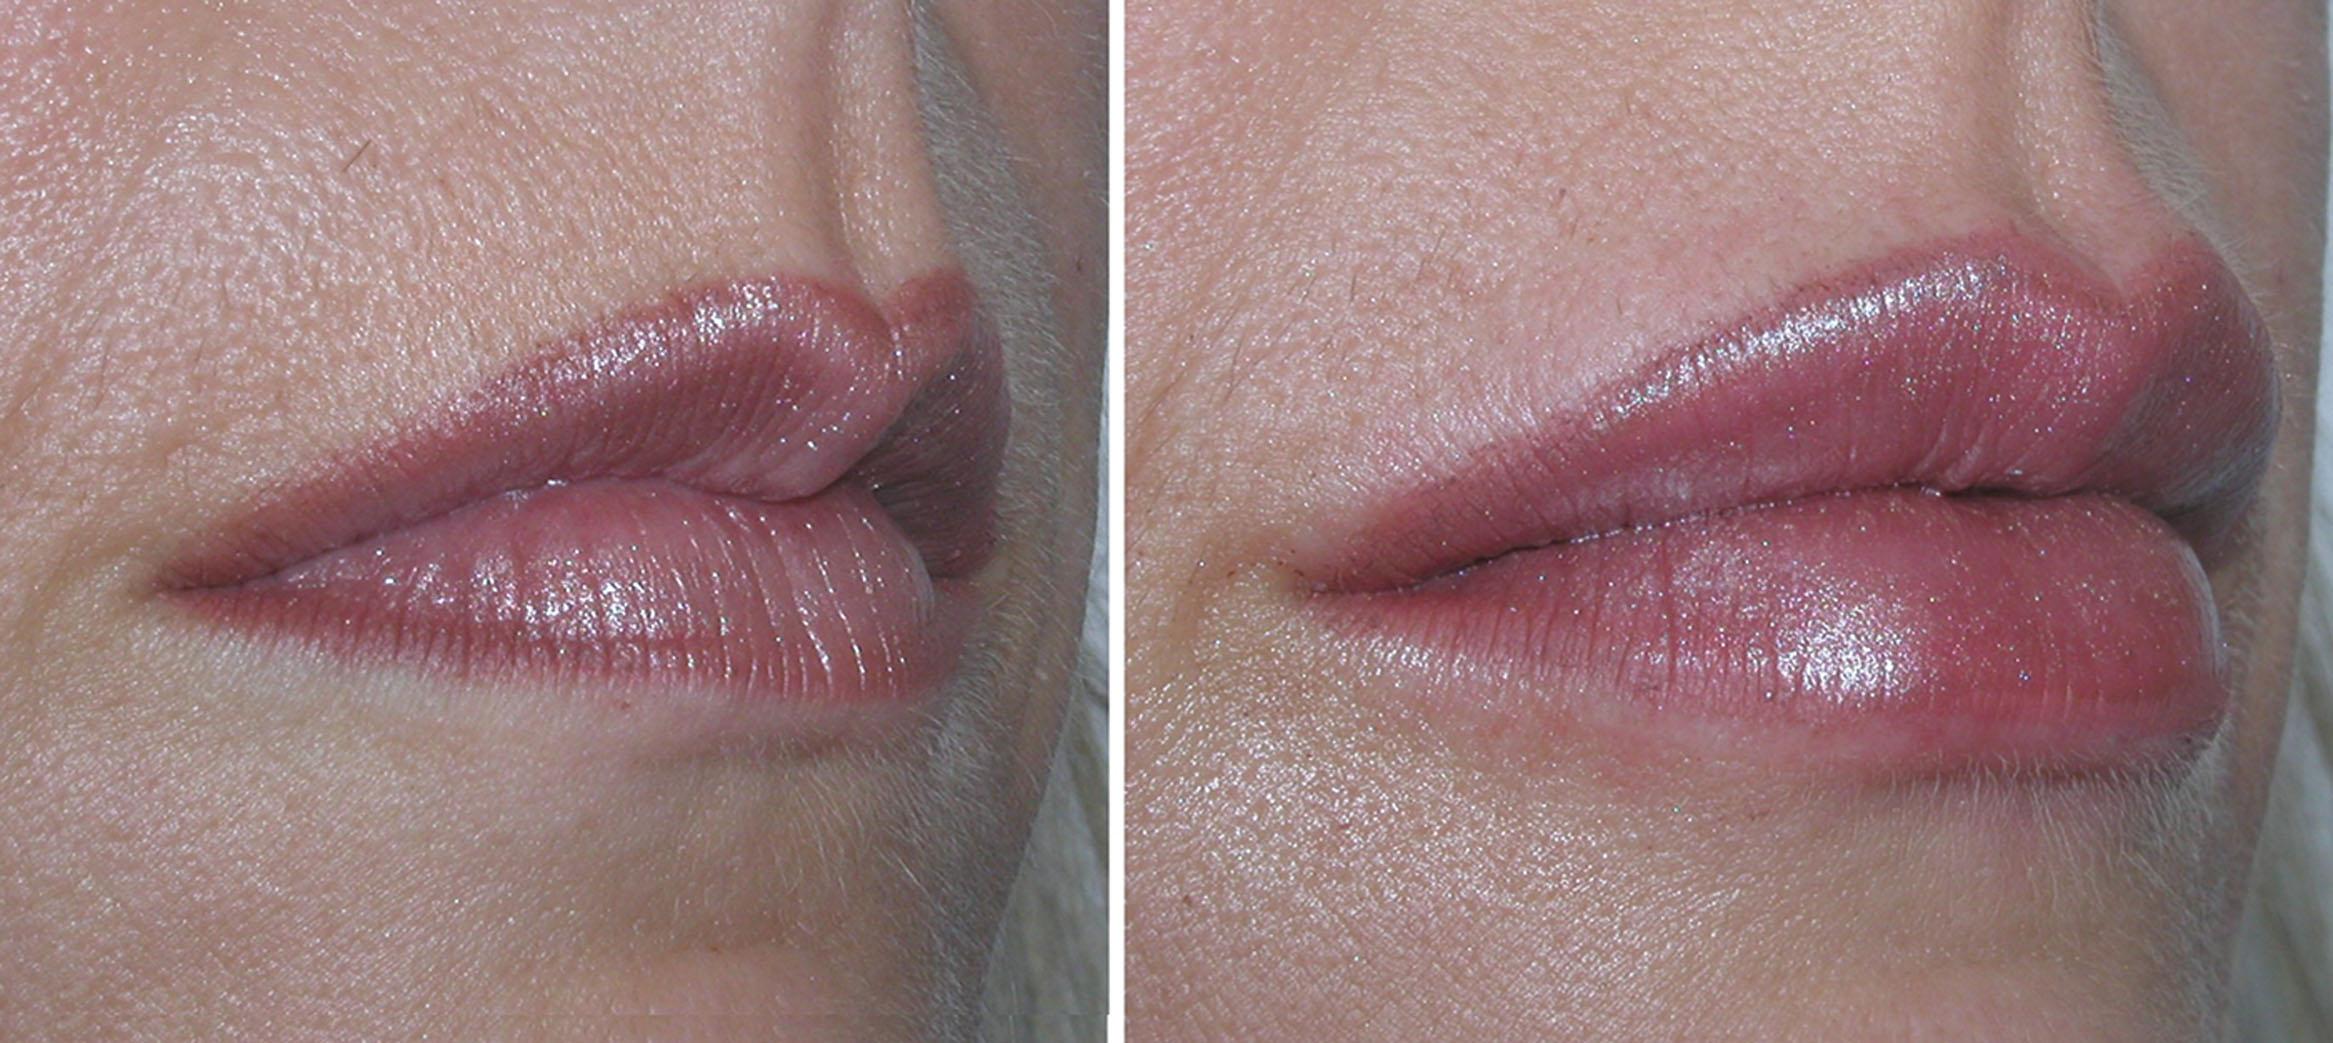 Fig. 10.42, This patient is shown before and after injection of 2 mL of hyaluronic acid filler for volume enhancement. This is a good example that patients with good pre-injection lip anatomy are easier to treat than older patients with severely deflated lips.